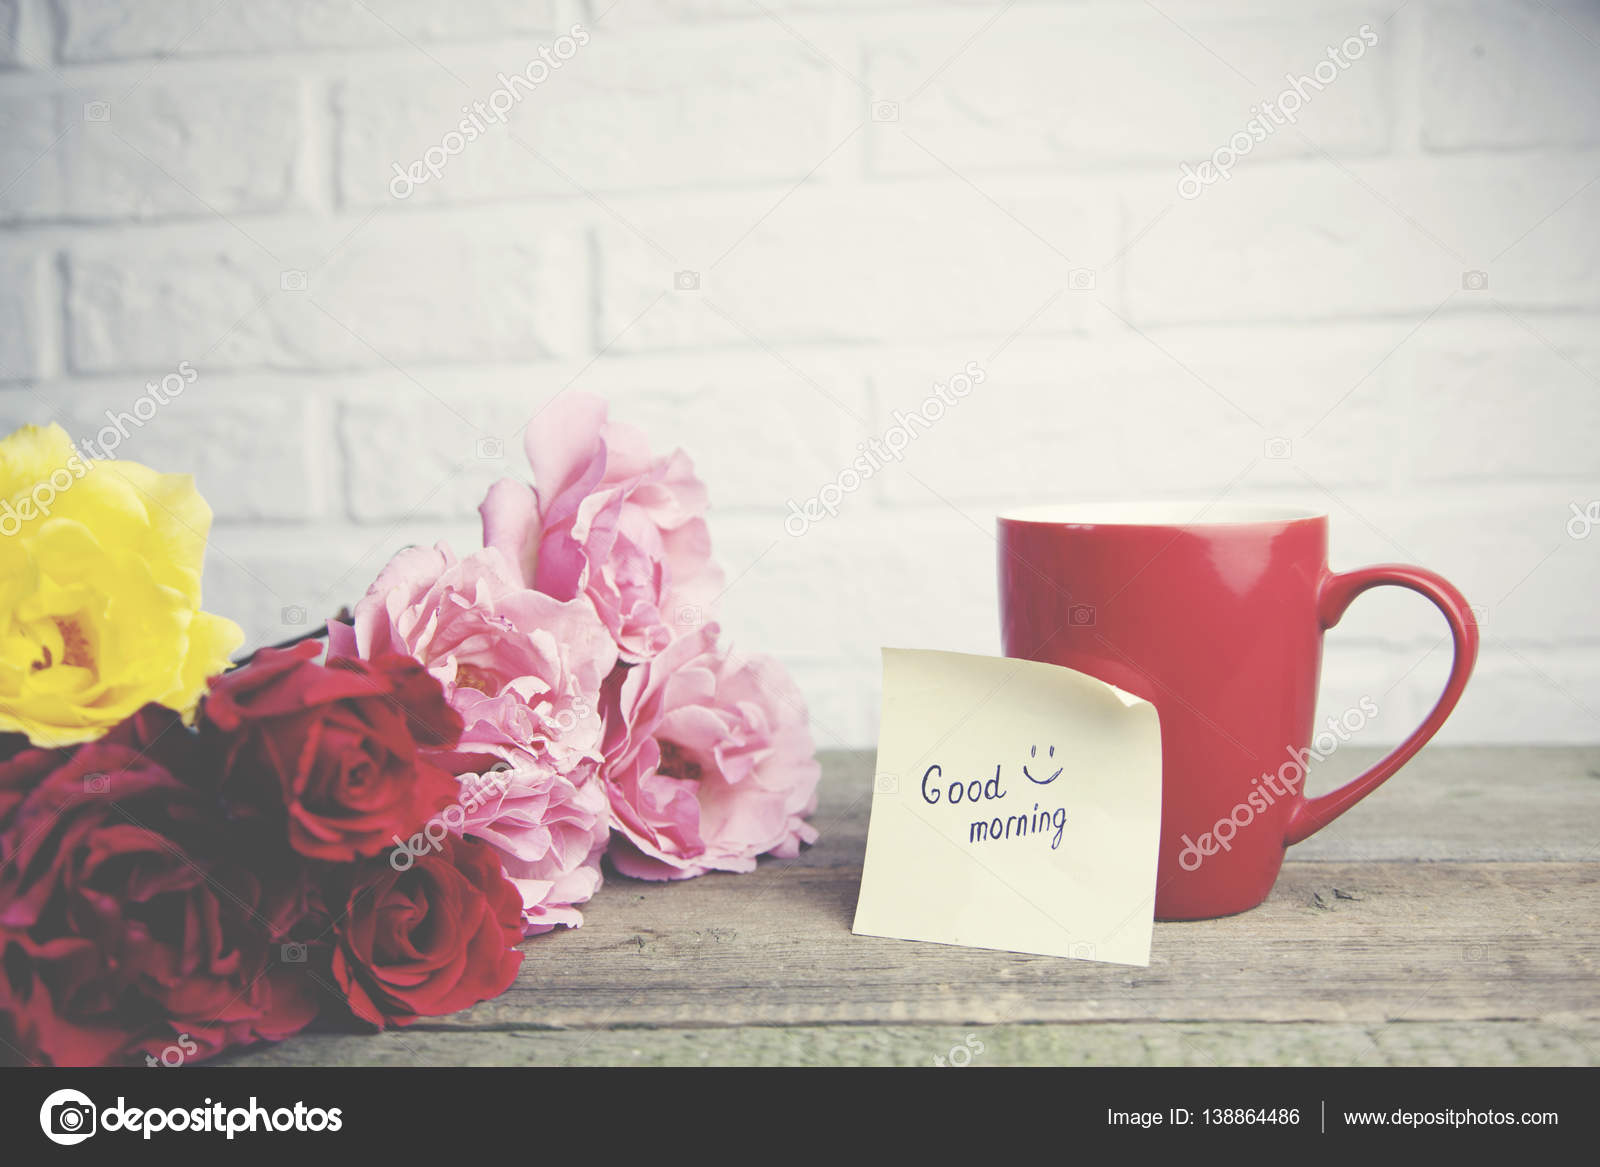 good morning wallpaper,pink,text,still life photography,cup,flower